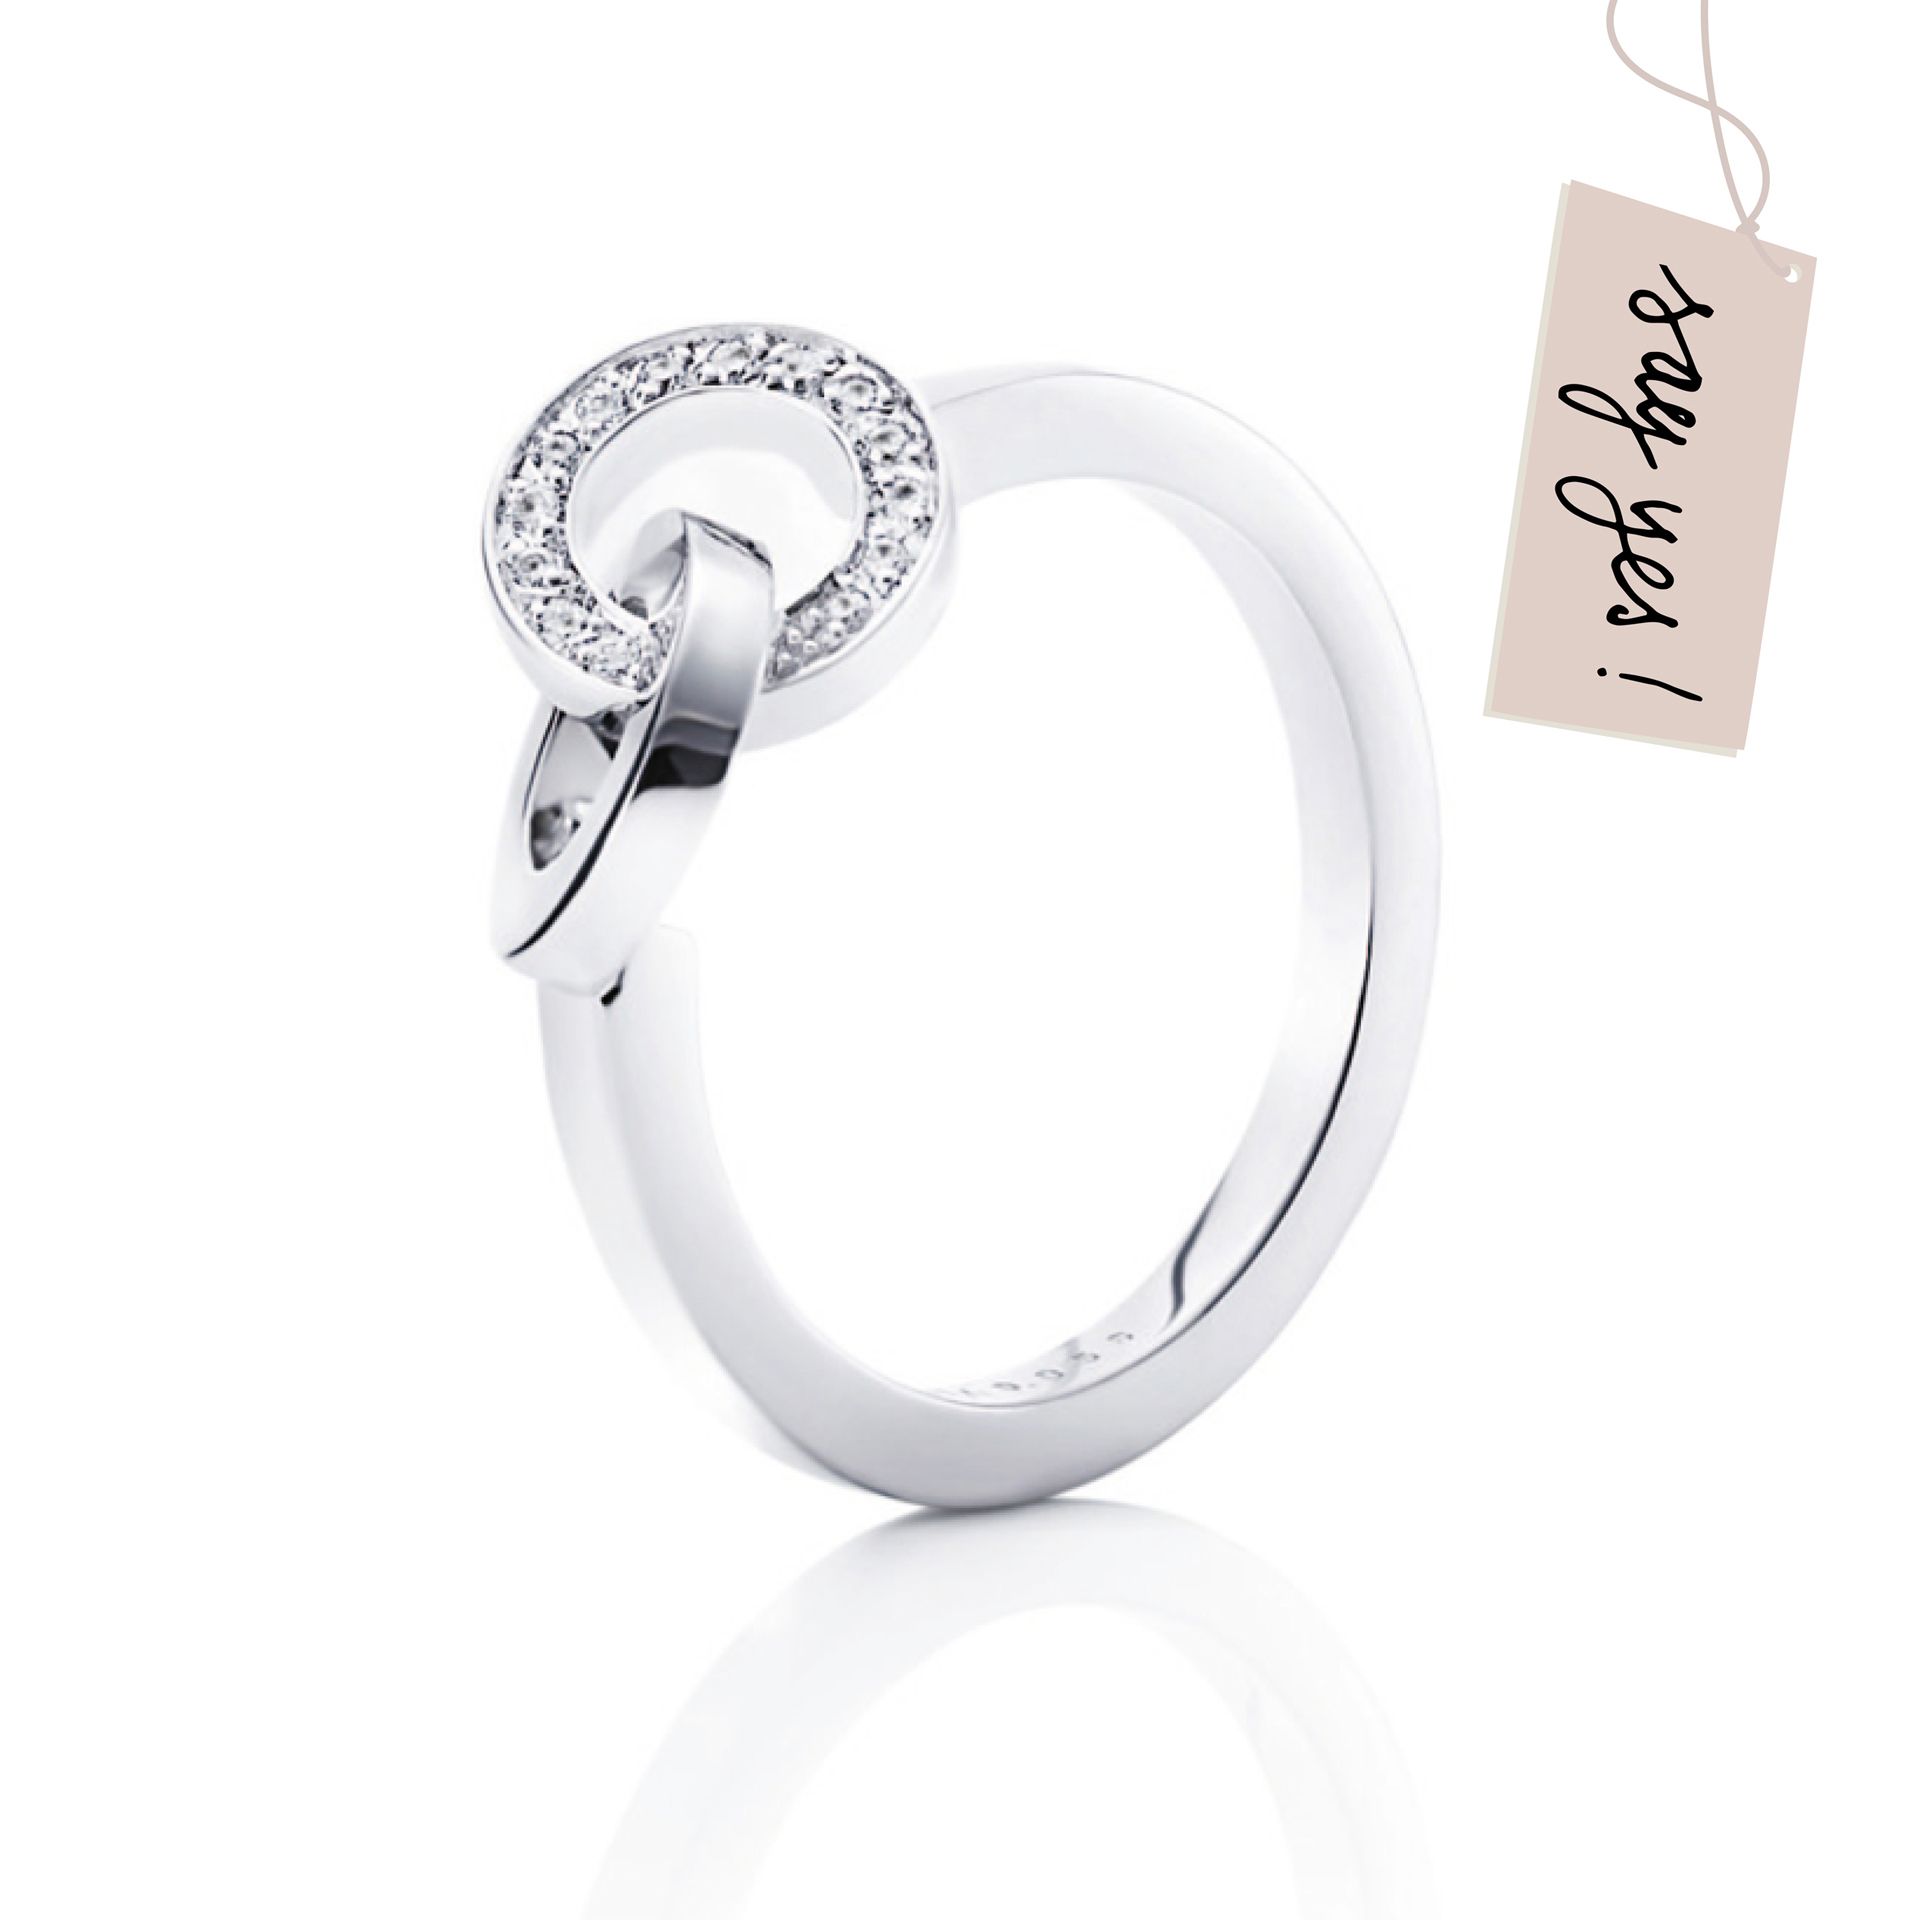 YOU & ME RING